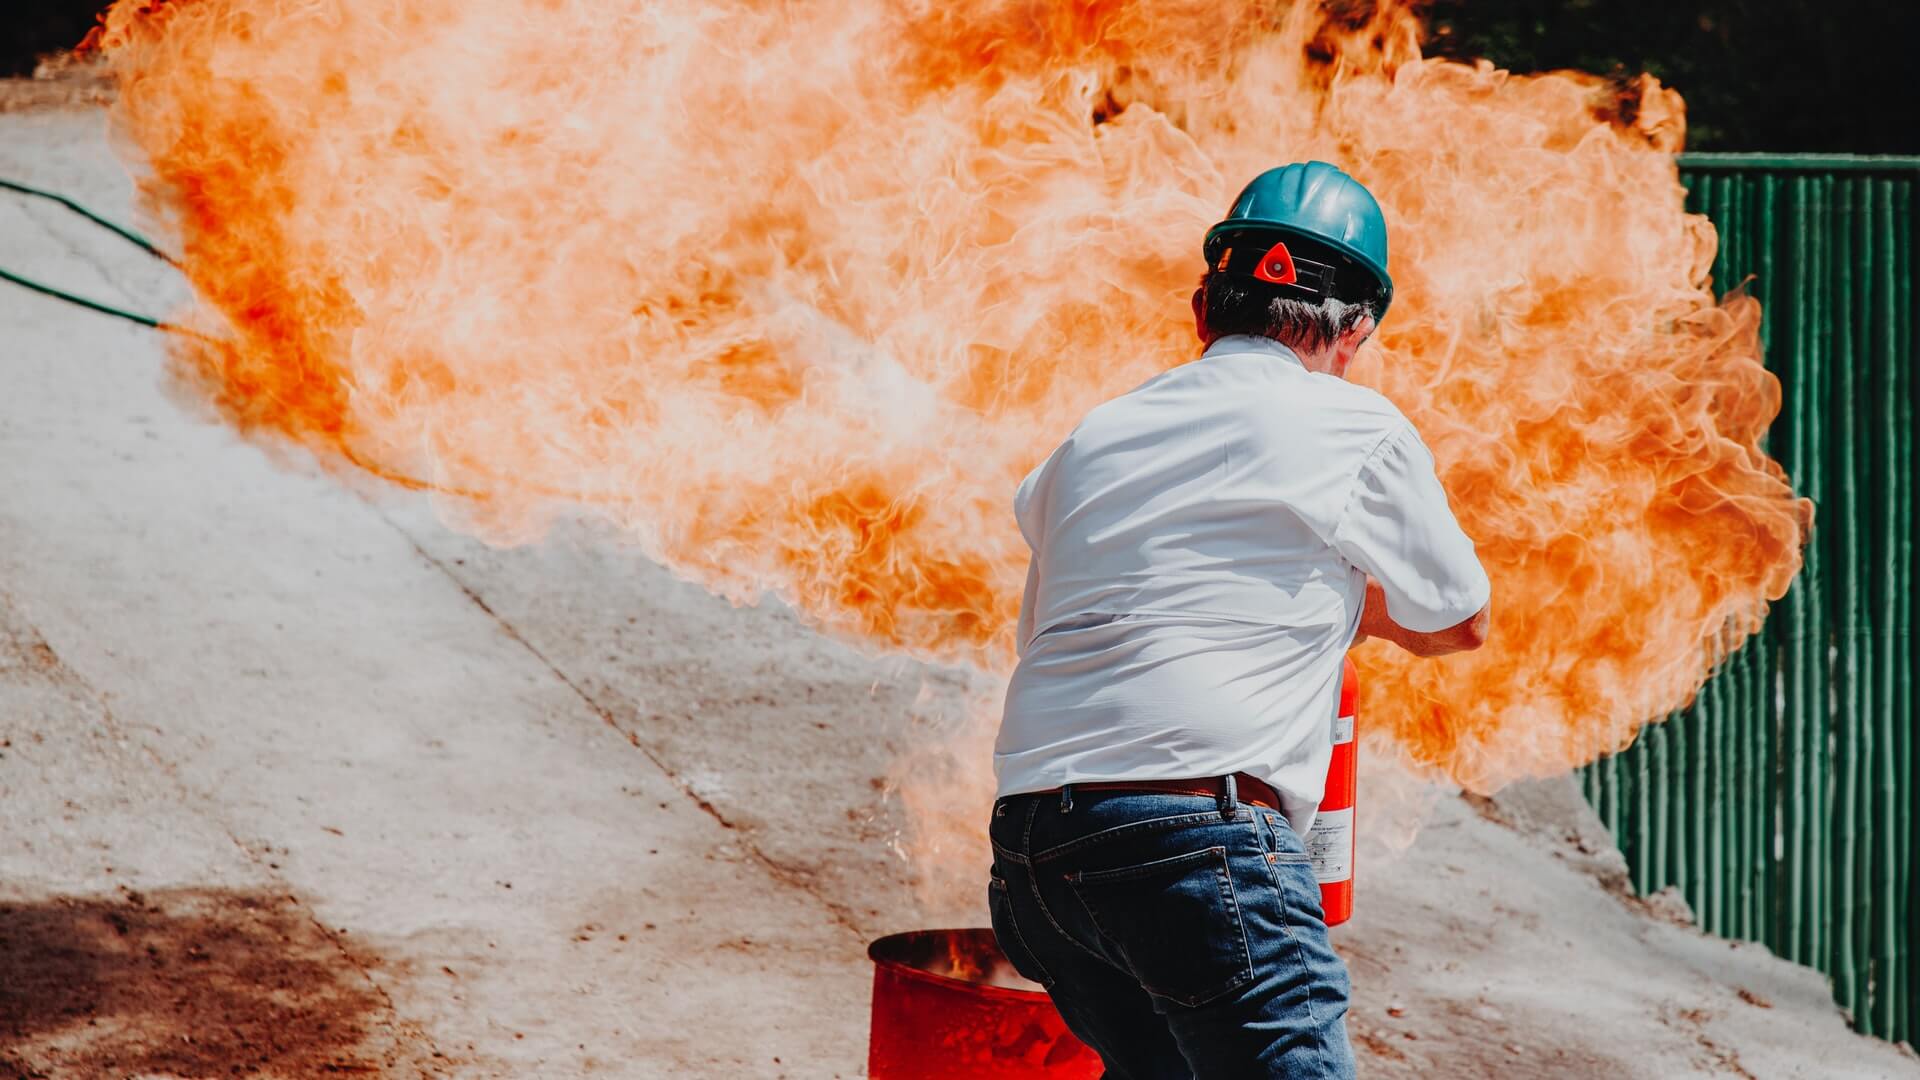 How to Clean Up After Class D Extinguishers? Read on and find out!